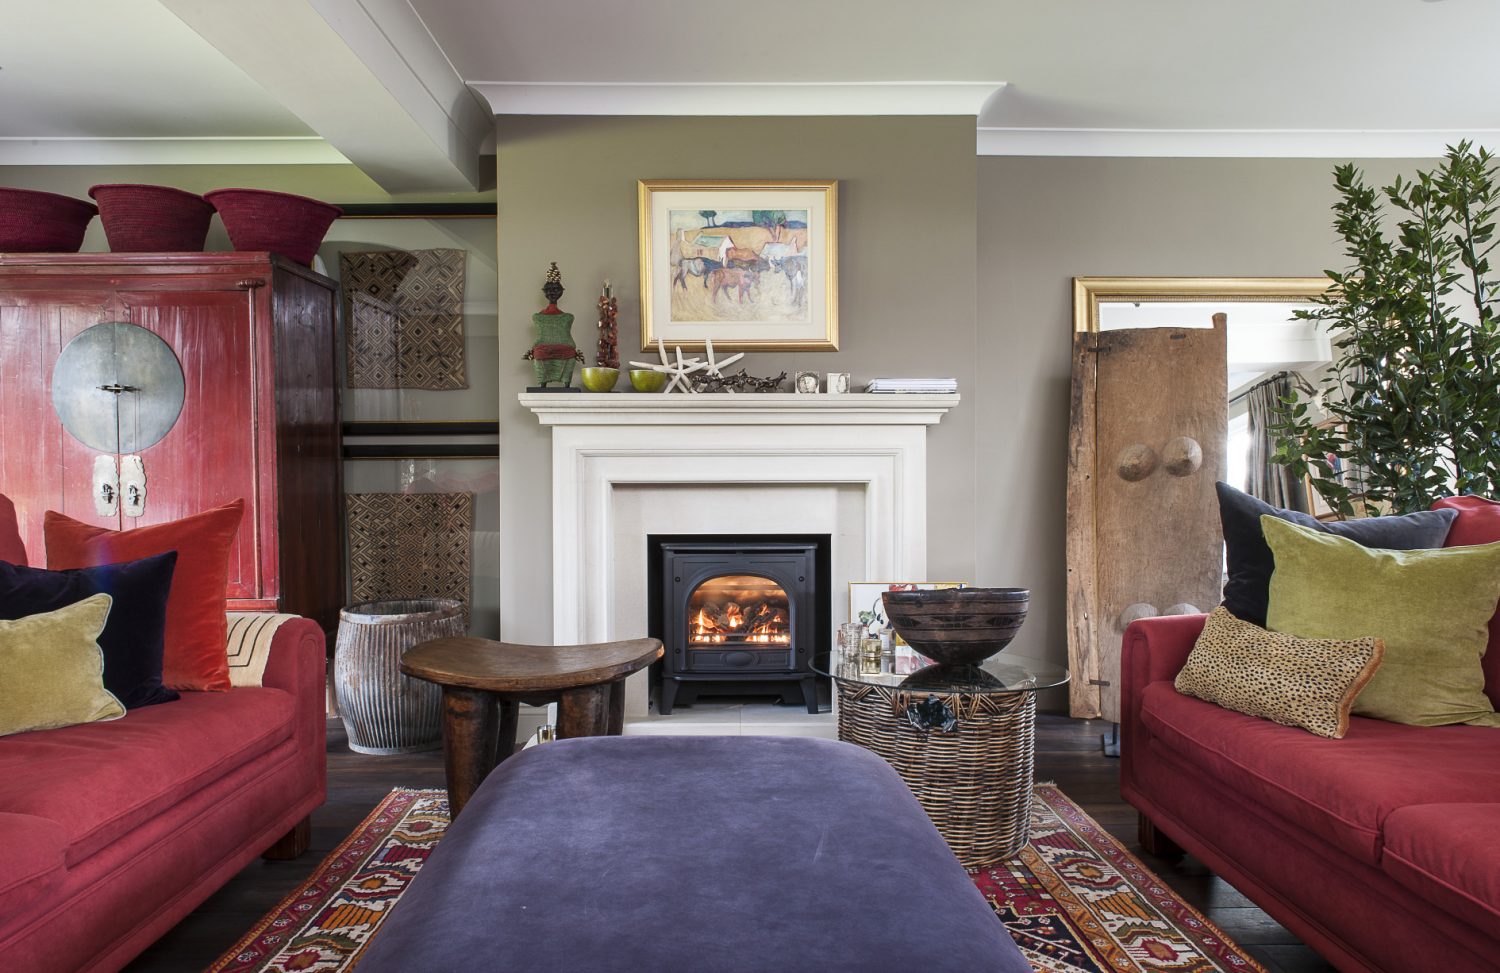 The drawing room is at once spacious and intimate with echoes everywhere of the couple’s South African roots